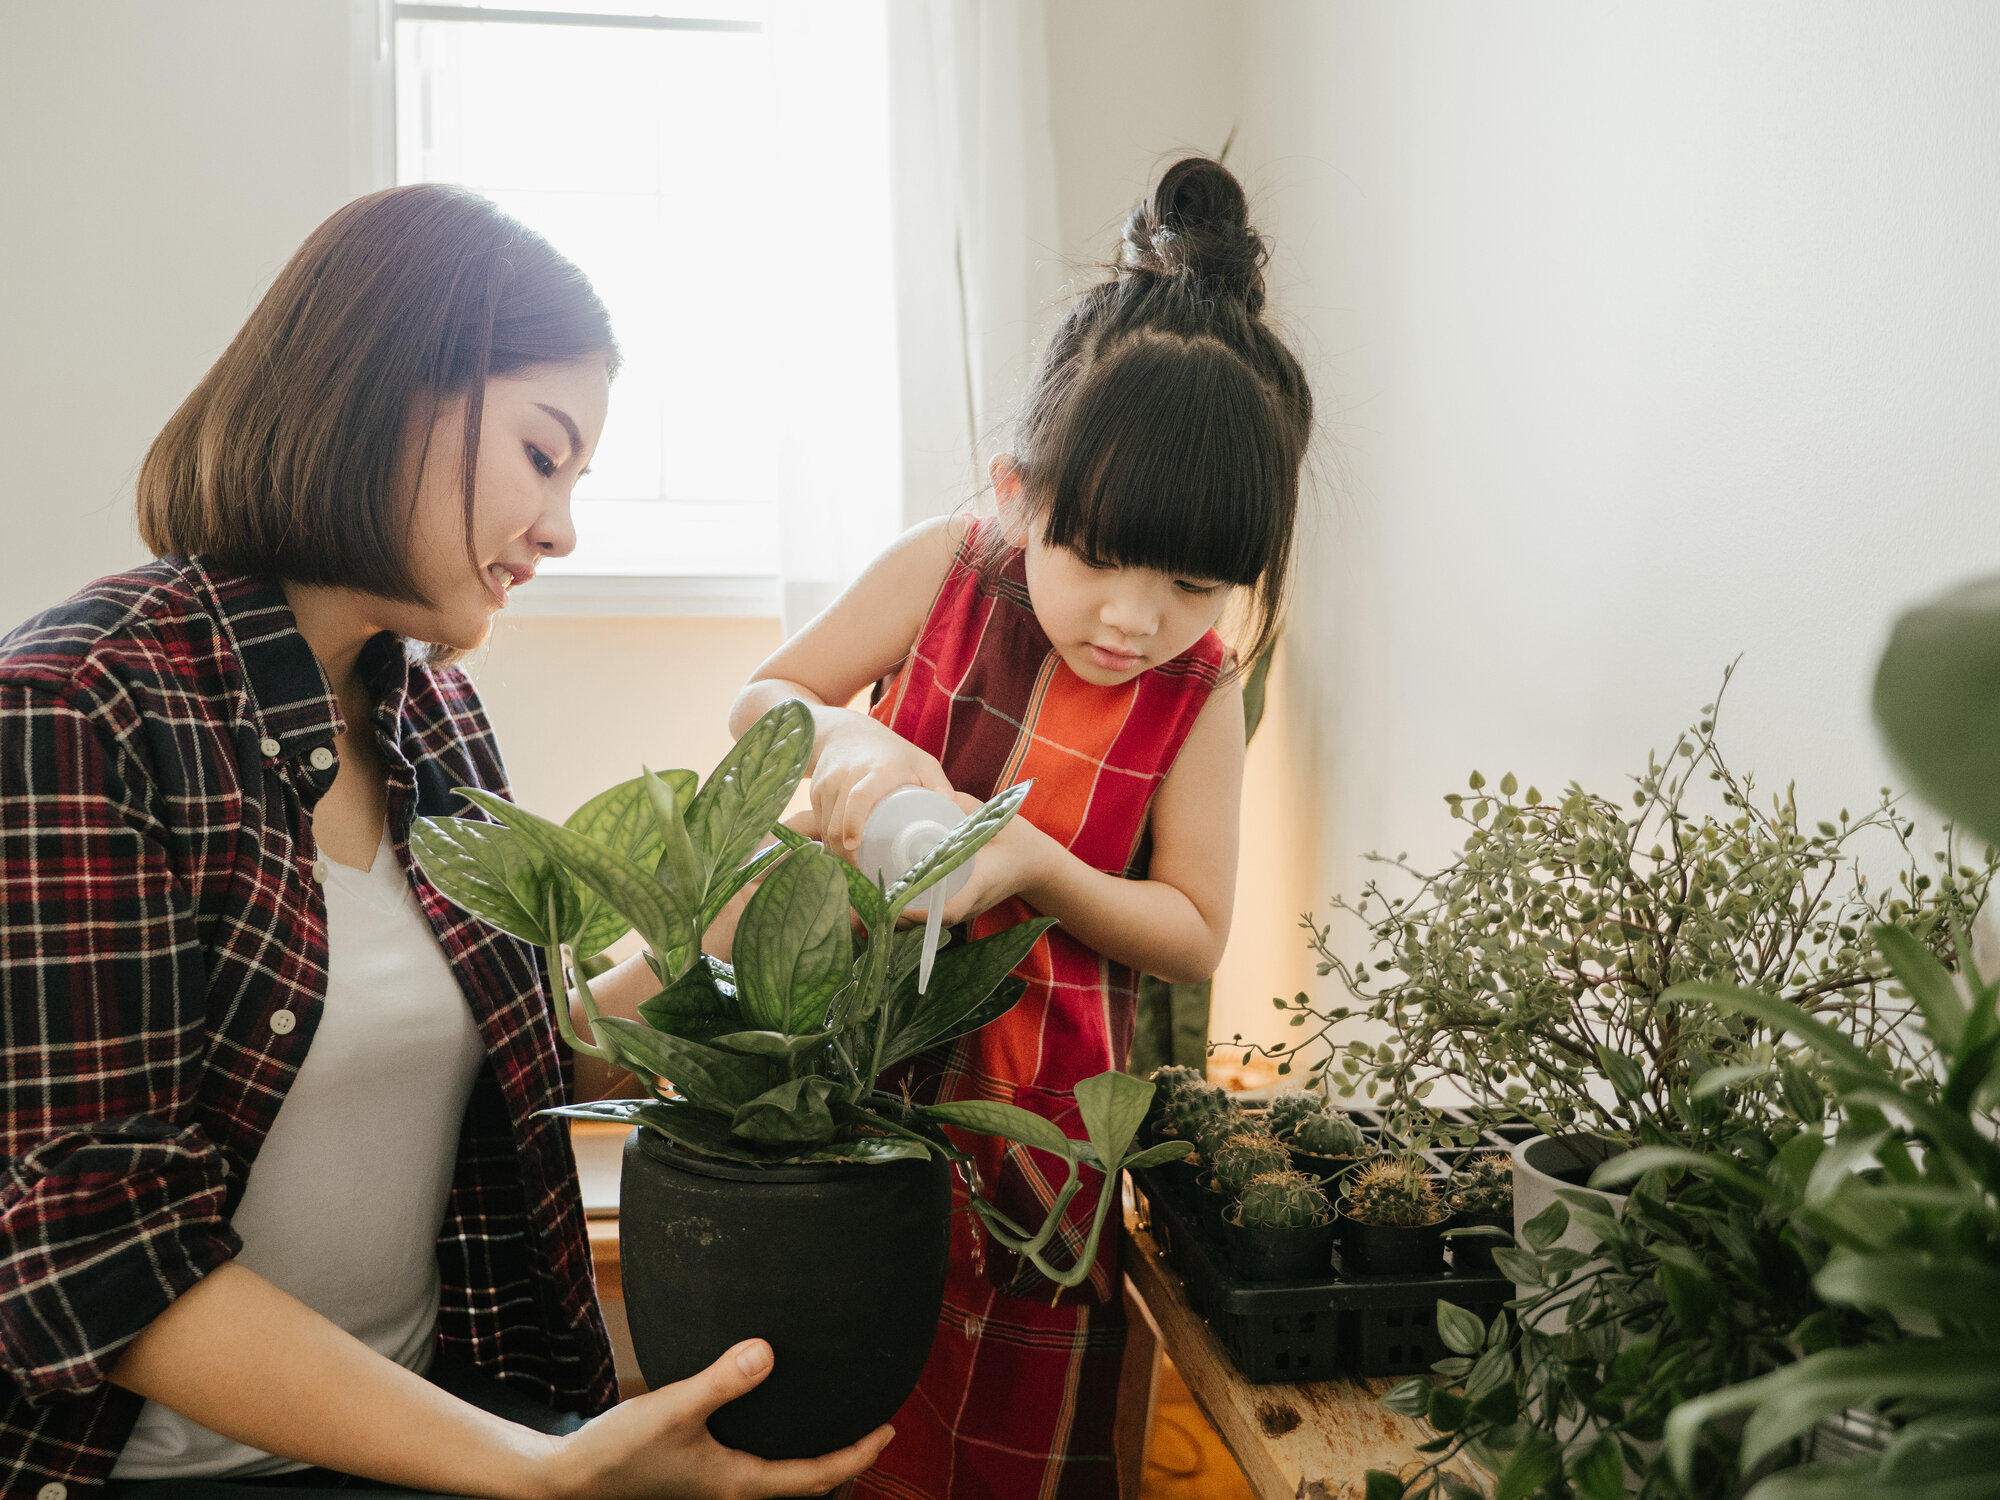 How to Be a Successful Plant Parent